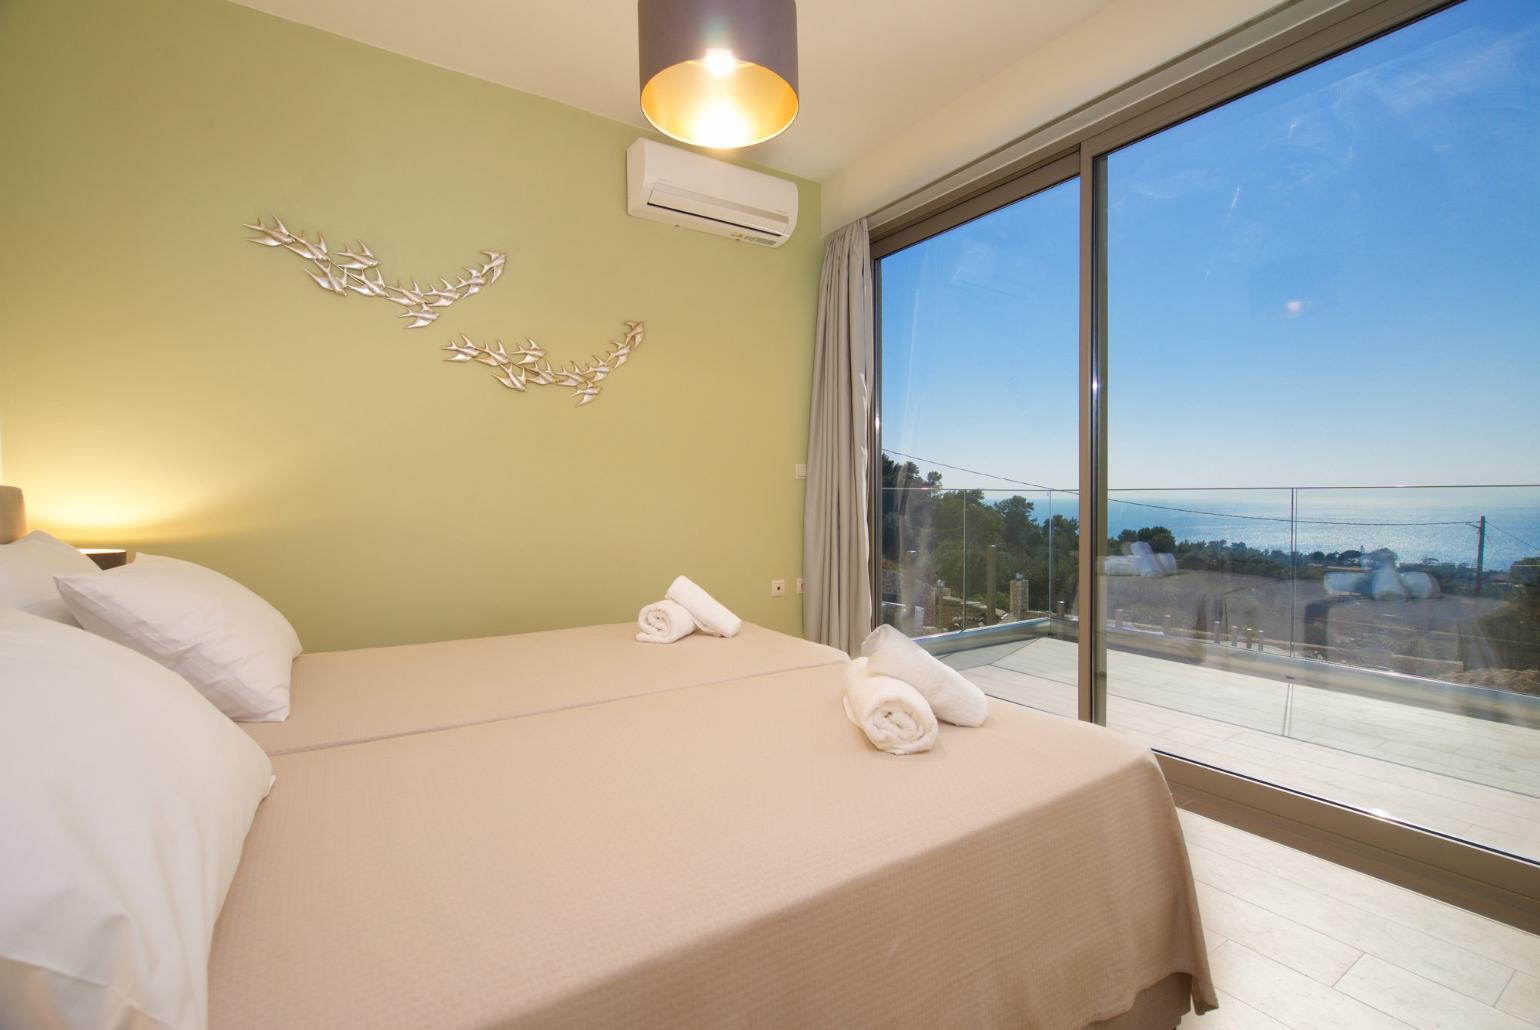 Air conditioned twin bedroom with terrace access and beautiful view 